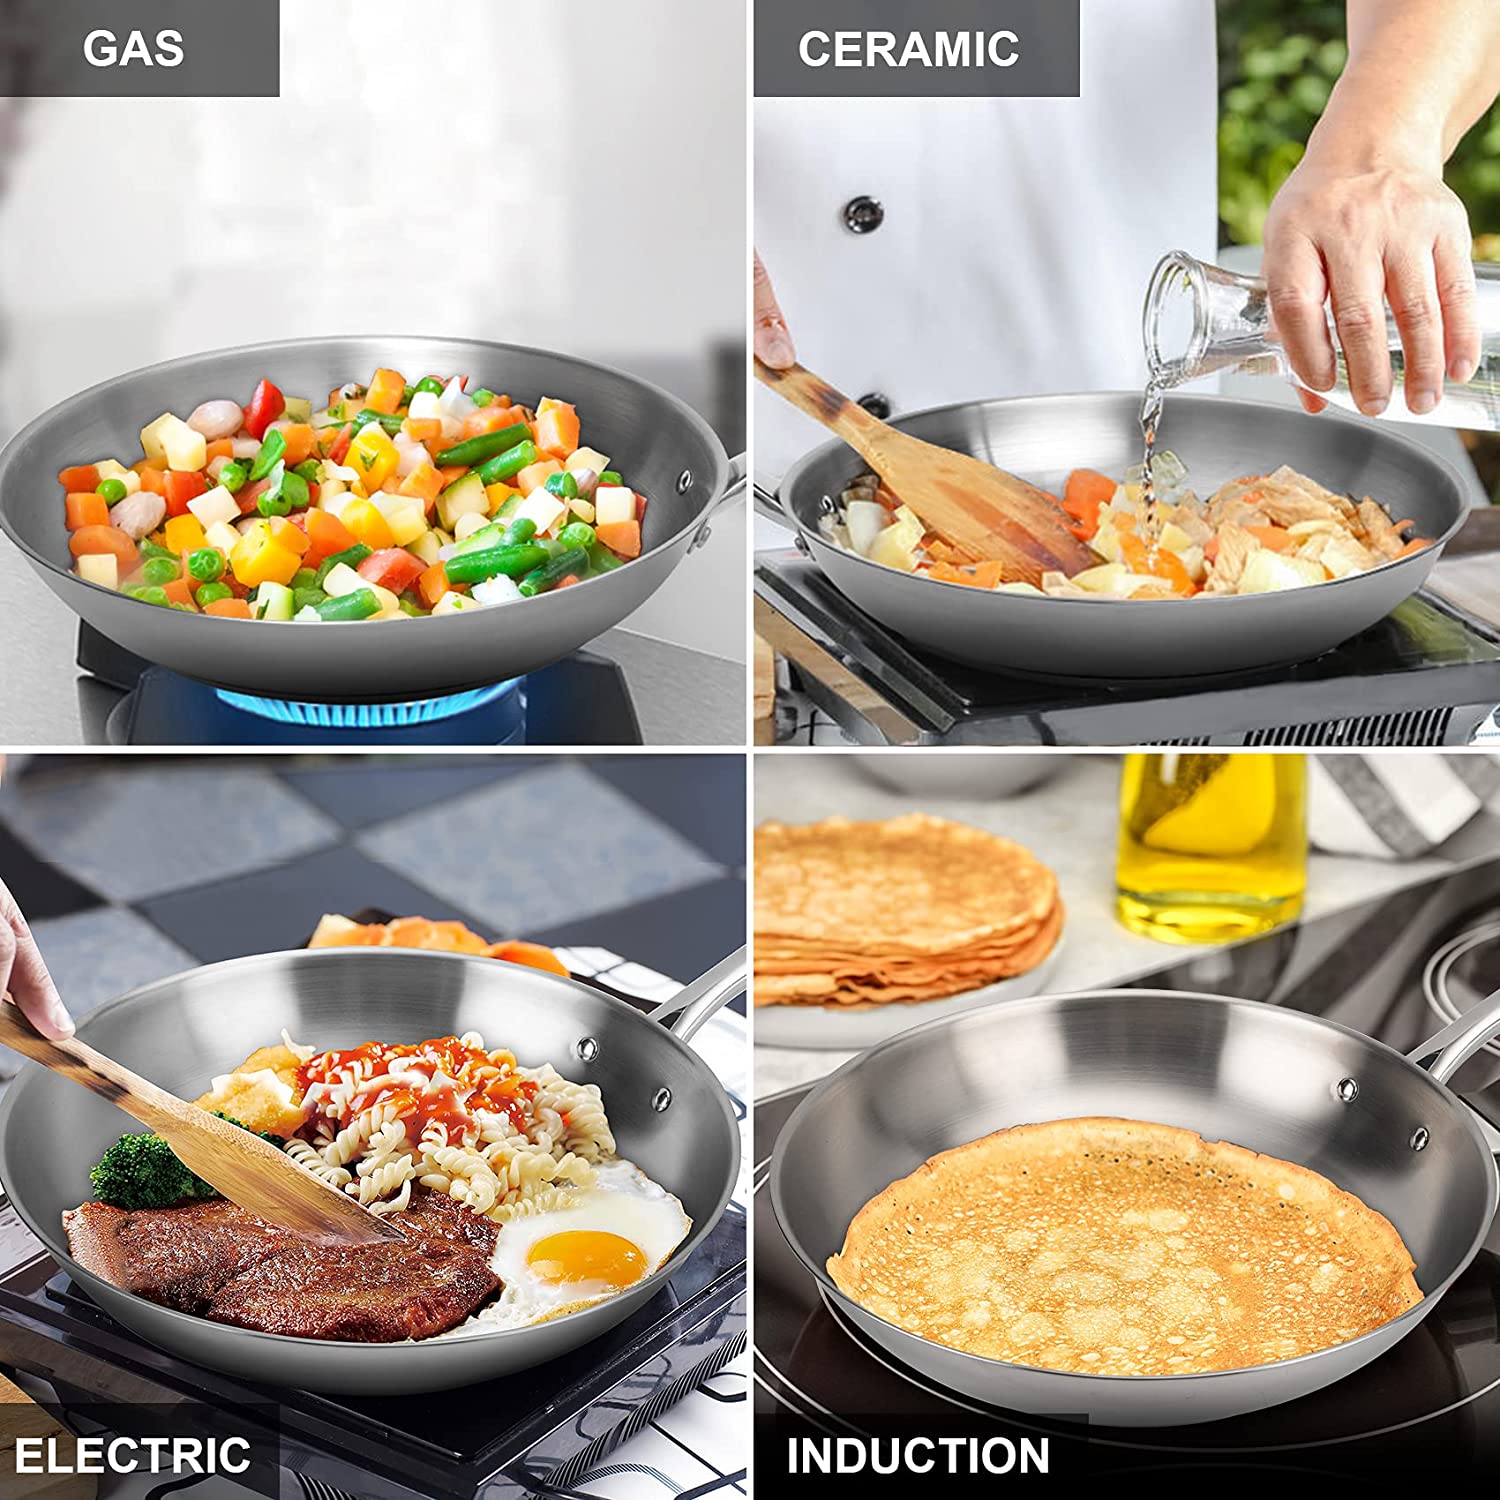 Skillet vs. Frying Pan: Is There a Difference?